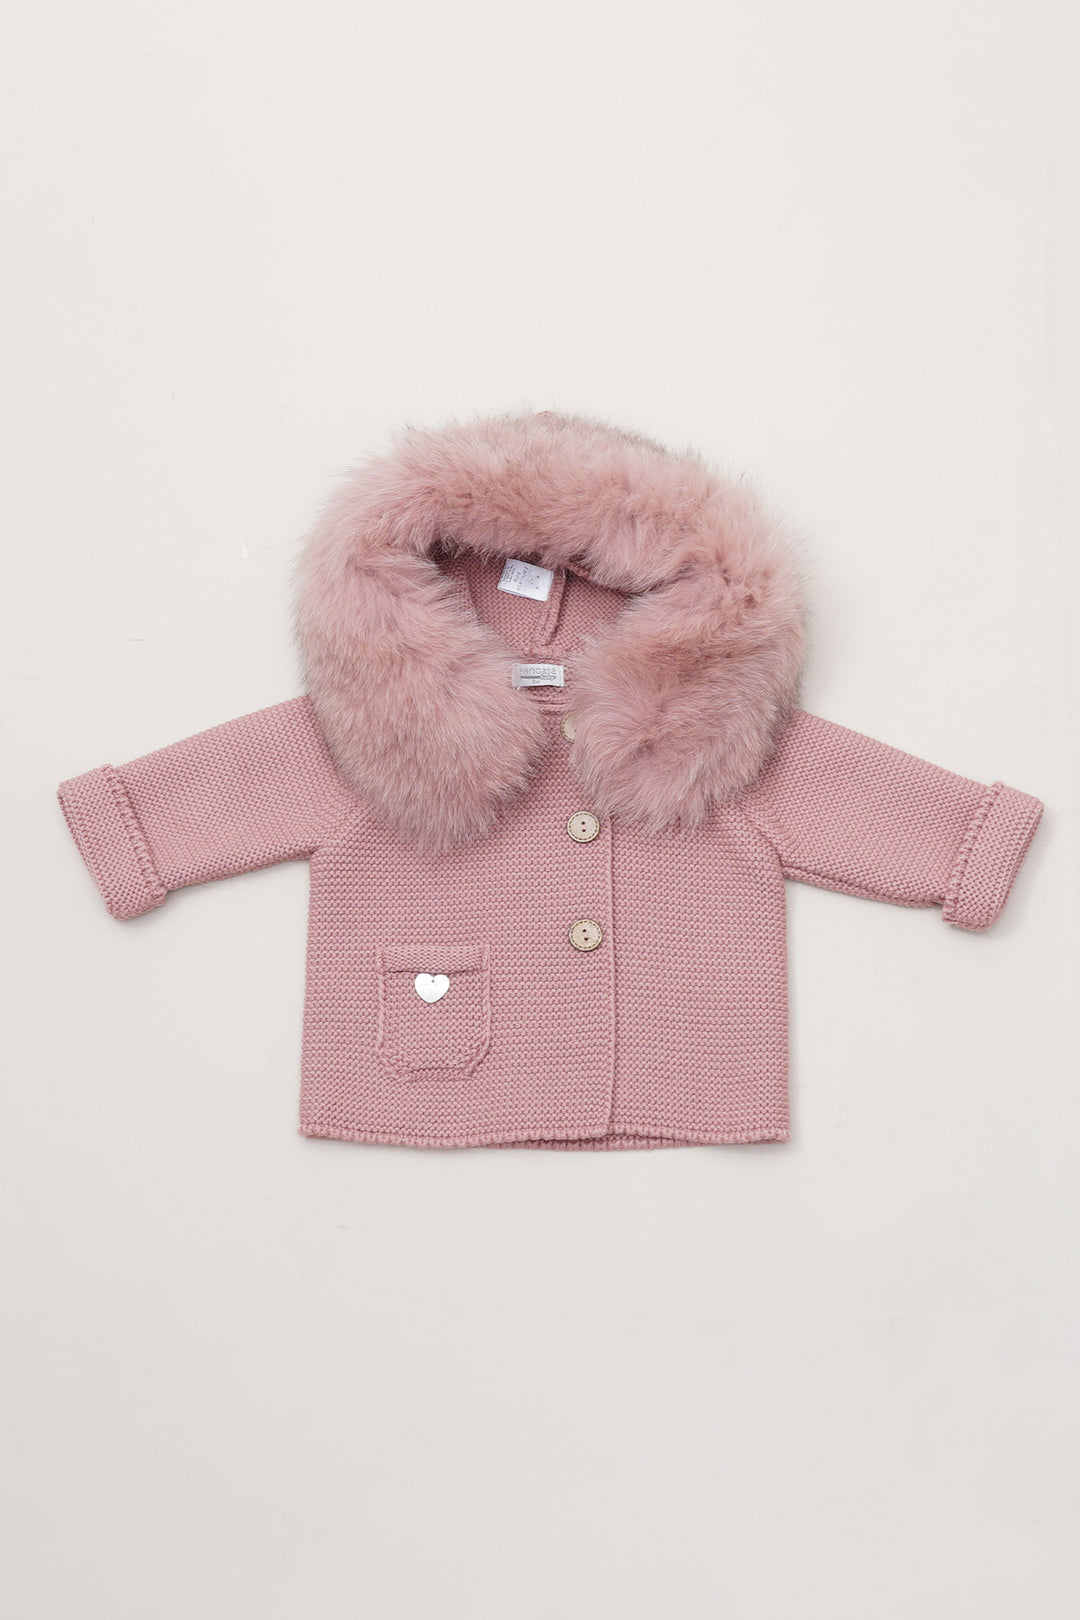 Pangasa AW23 PREORDER Rose Pink Faux Fur Knitted Jacket | iphoneandroidapplications